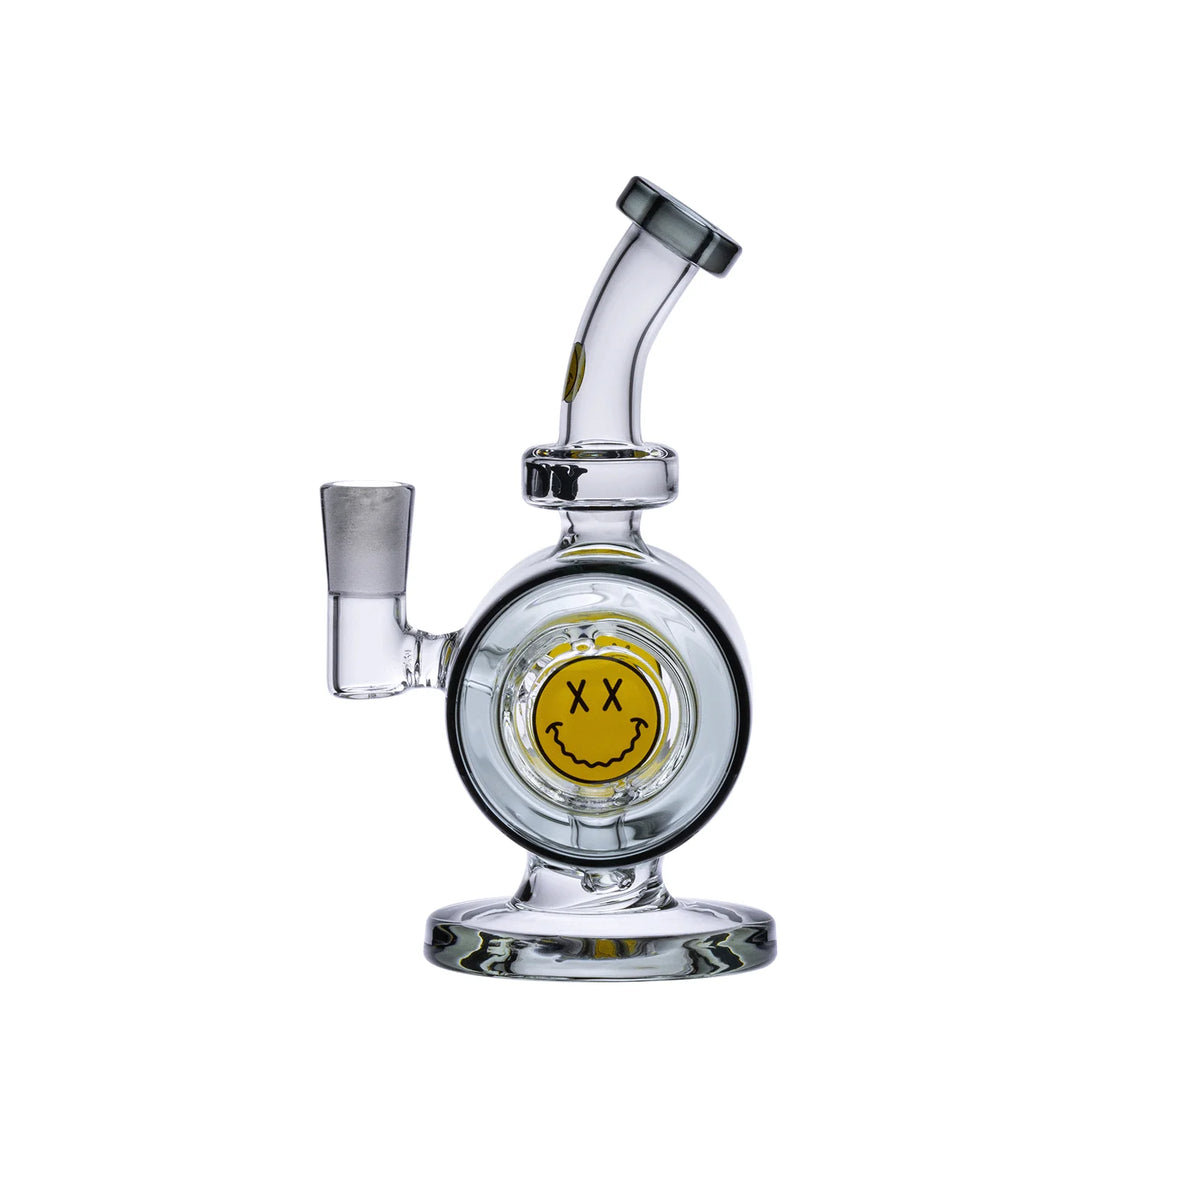 Spin Cycle Mini Dab Rig - Goody Glass